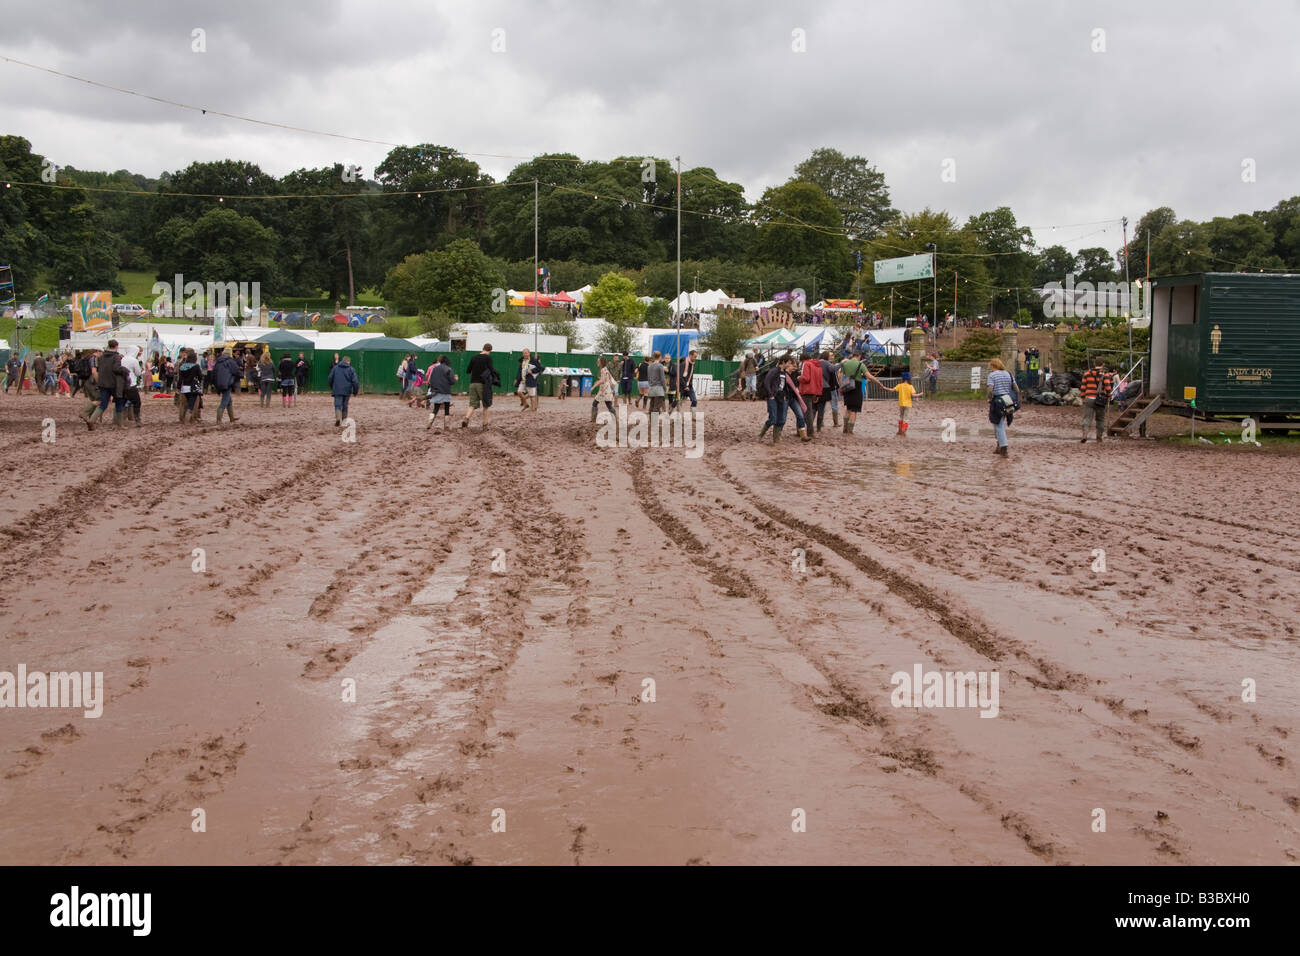 Greenman Festival High Resolution Stock Photography and Images - Alamy